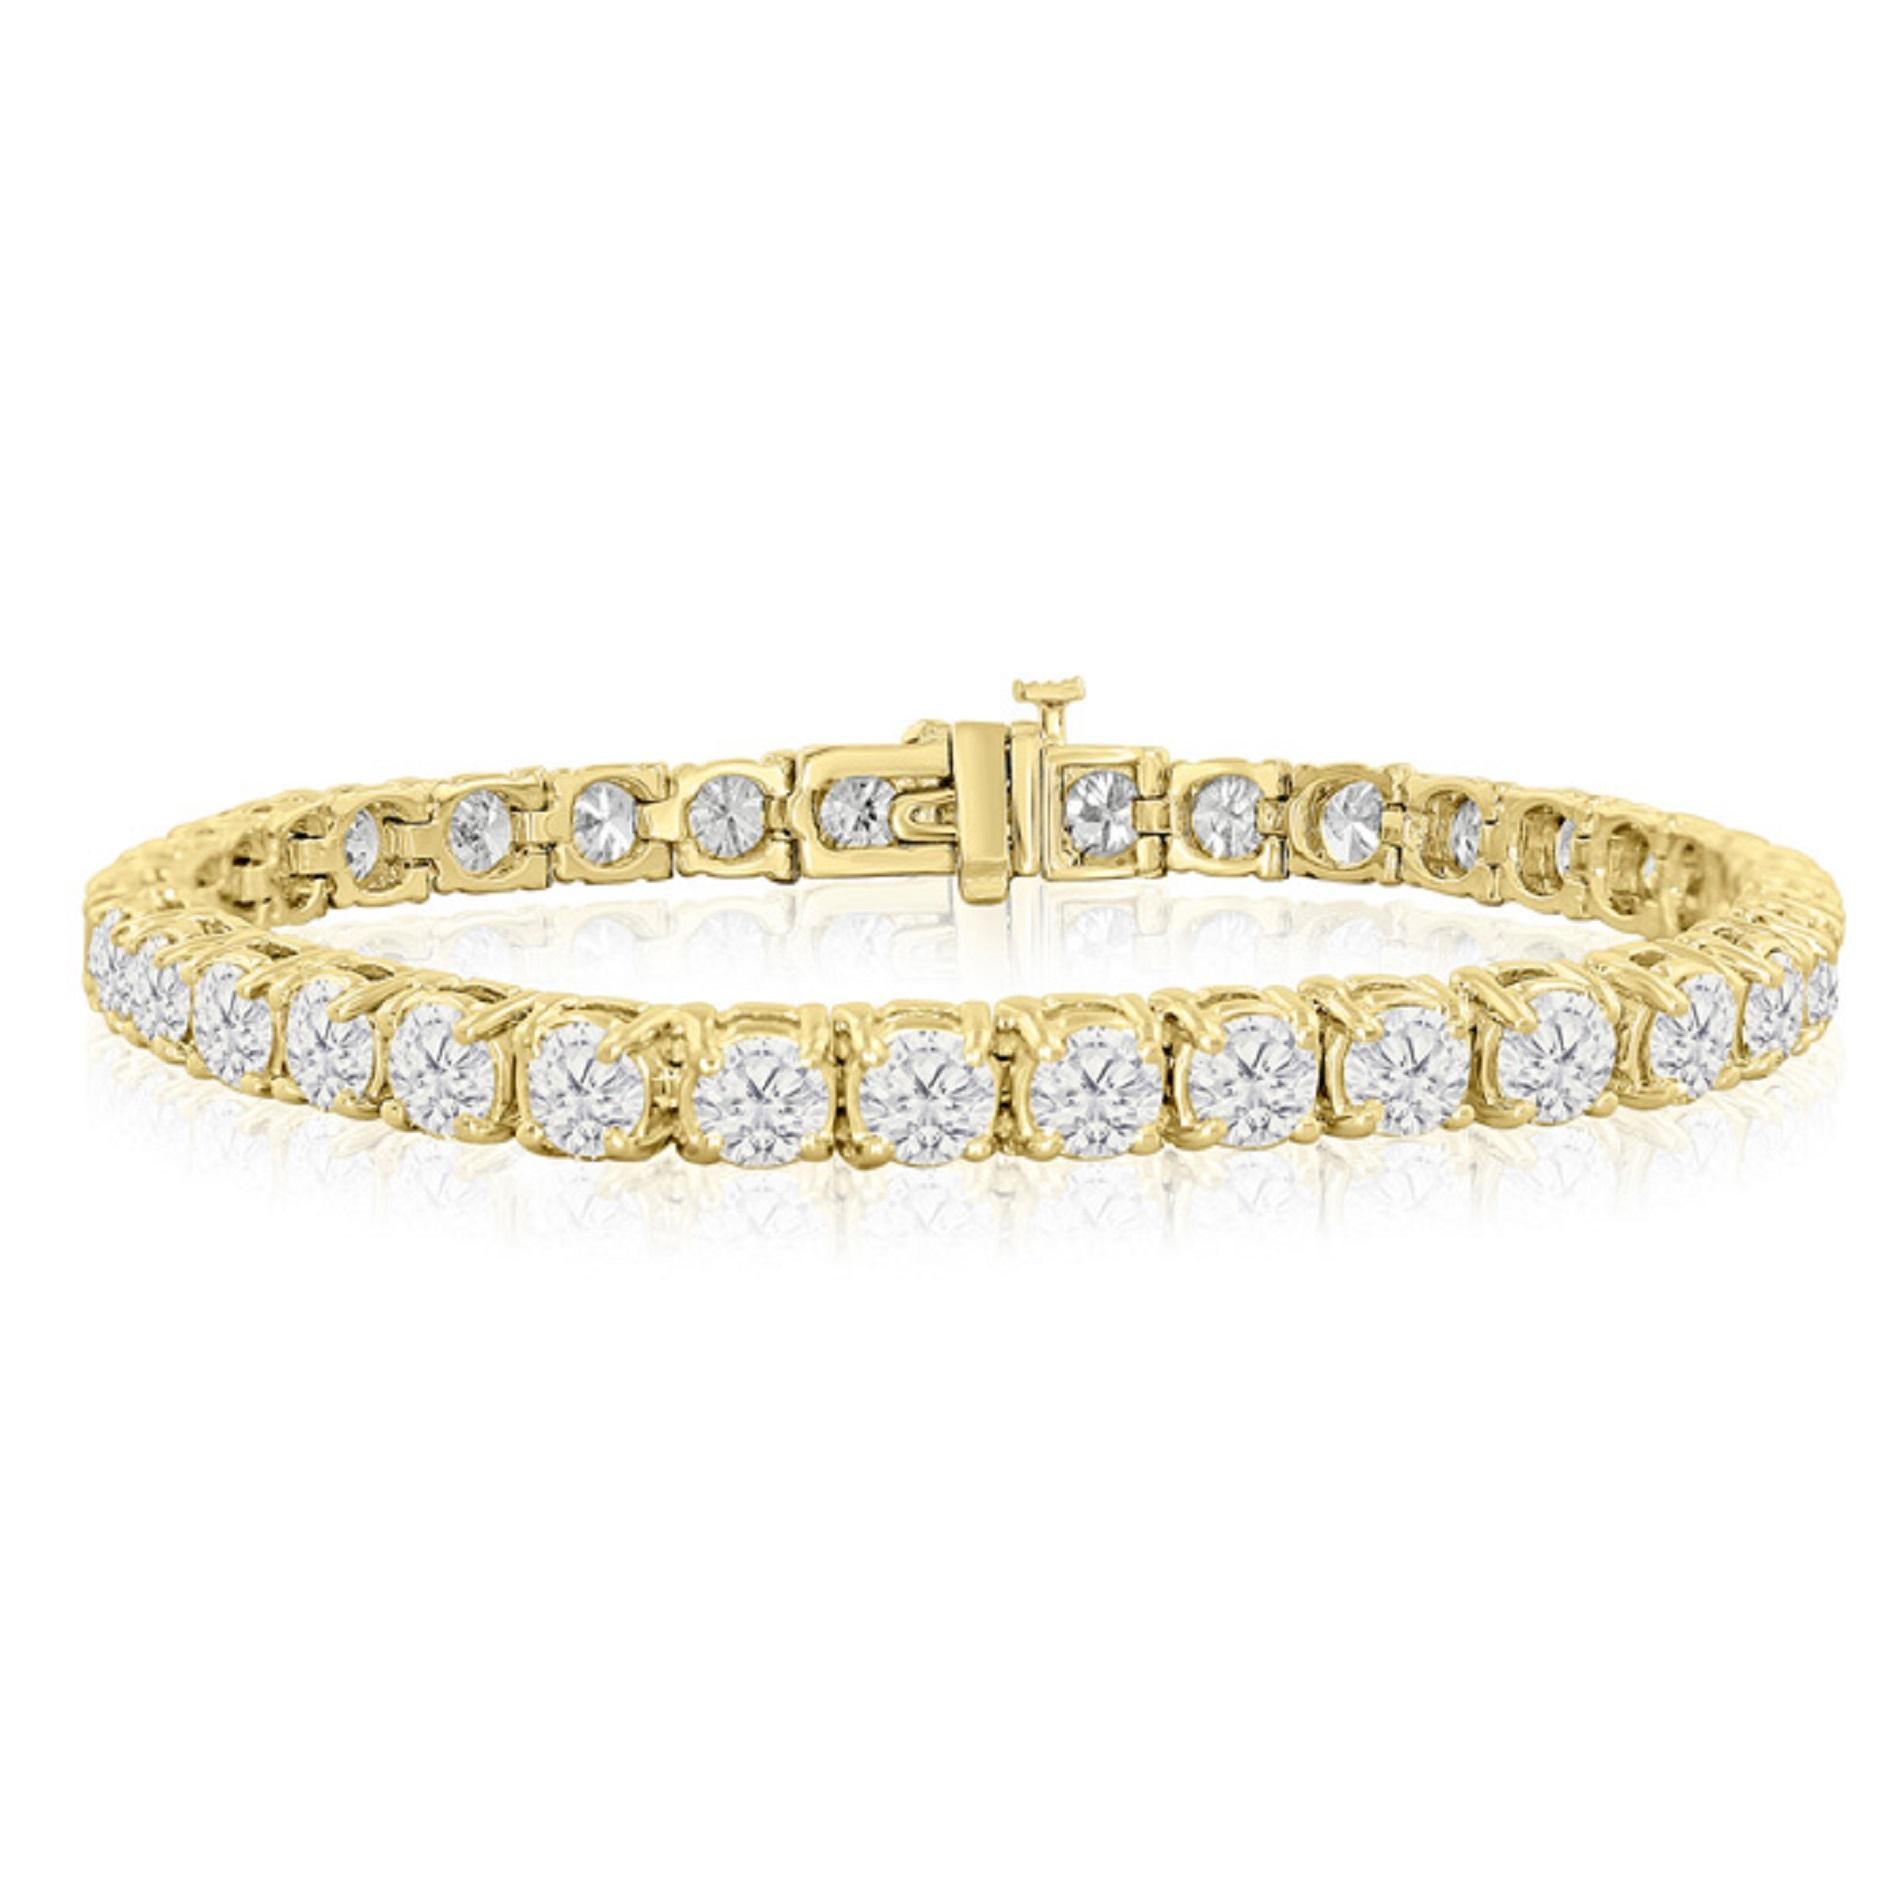 19 Carat Round Cut Diamond 18K Yellow Gold Bracelet In New Condition For Sale In Rome, IT